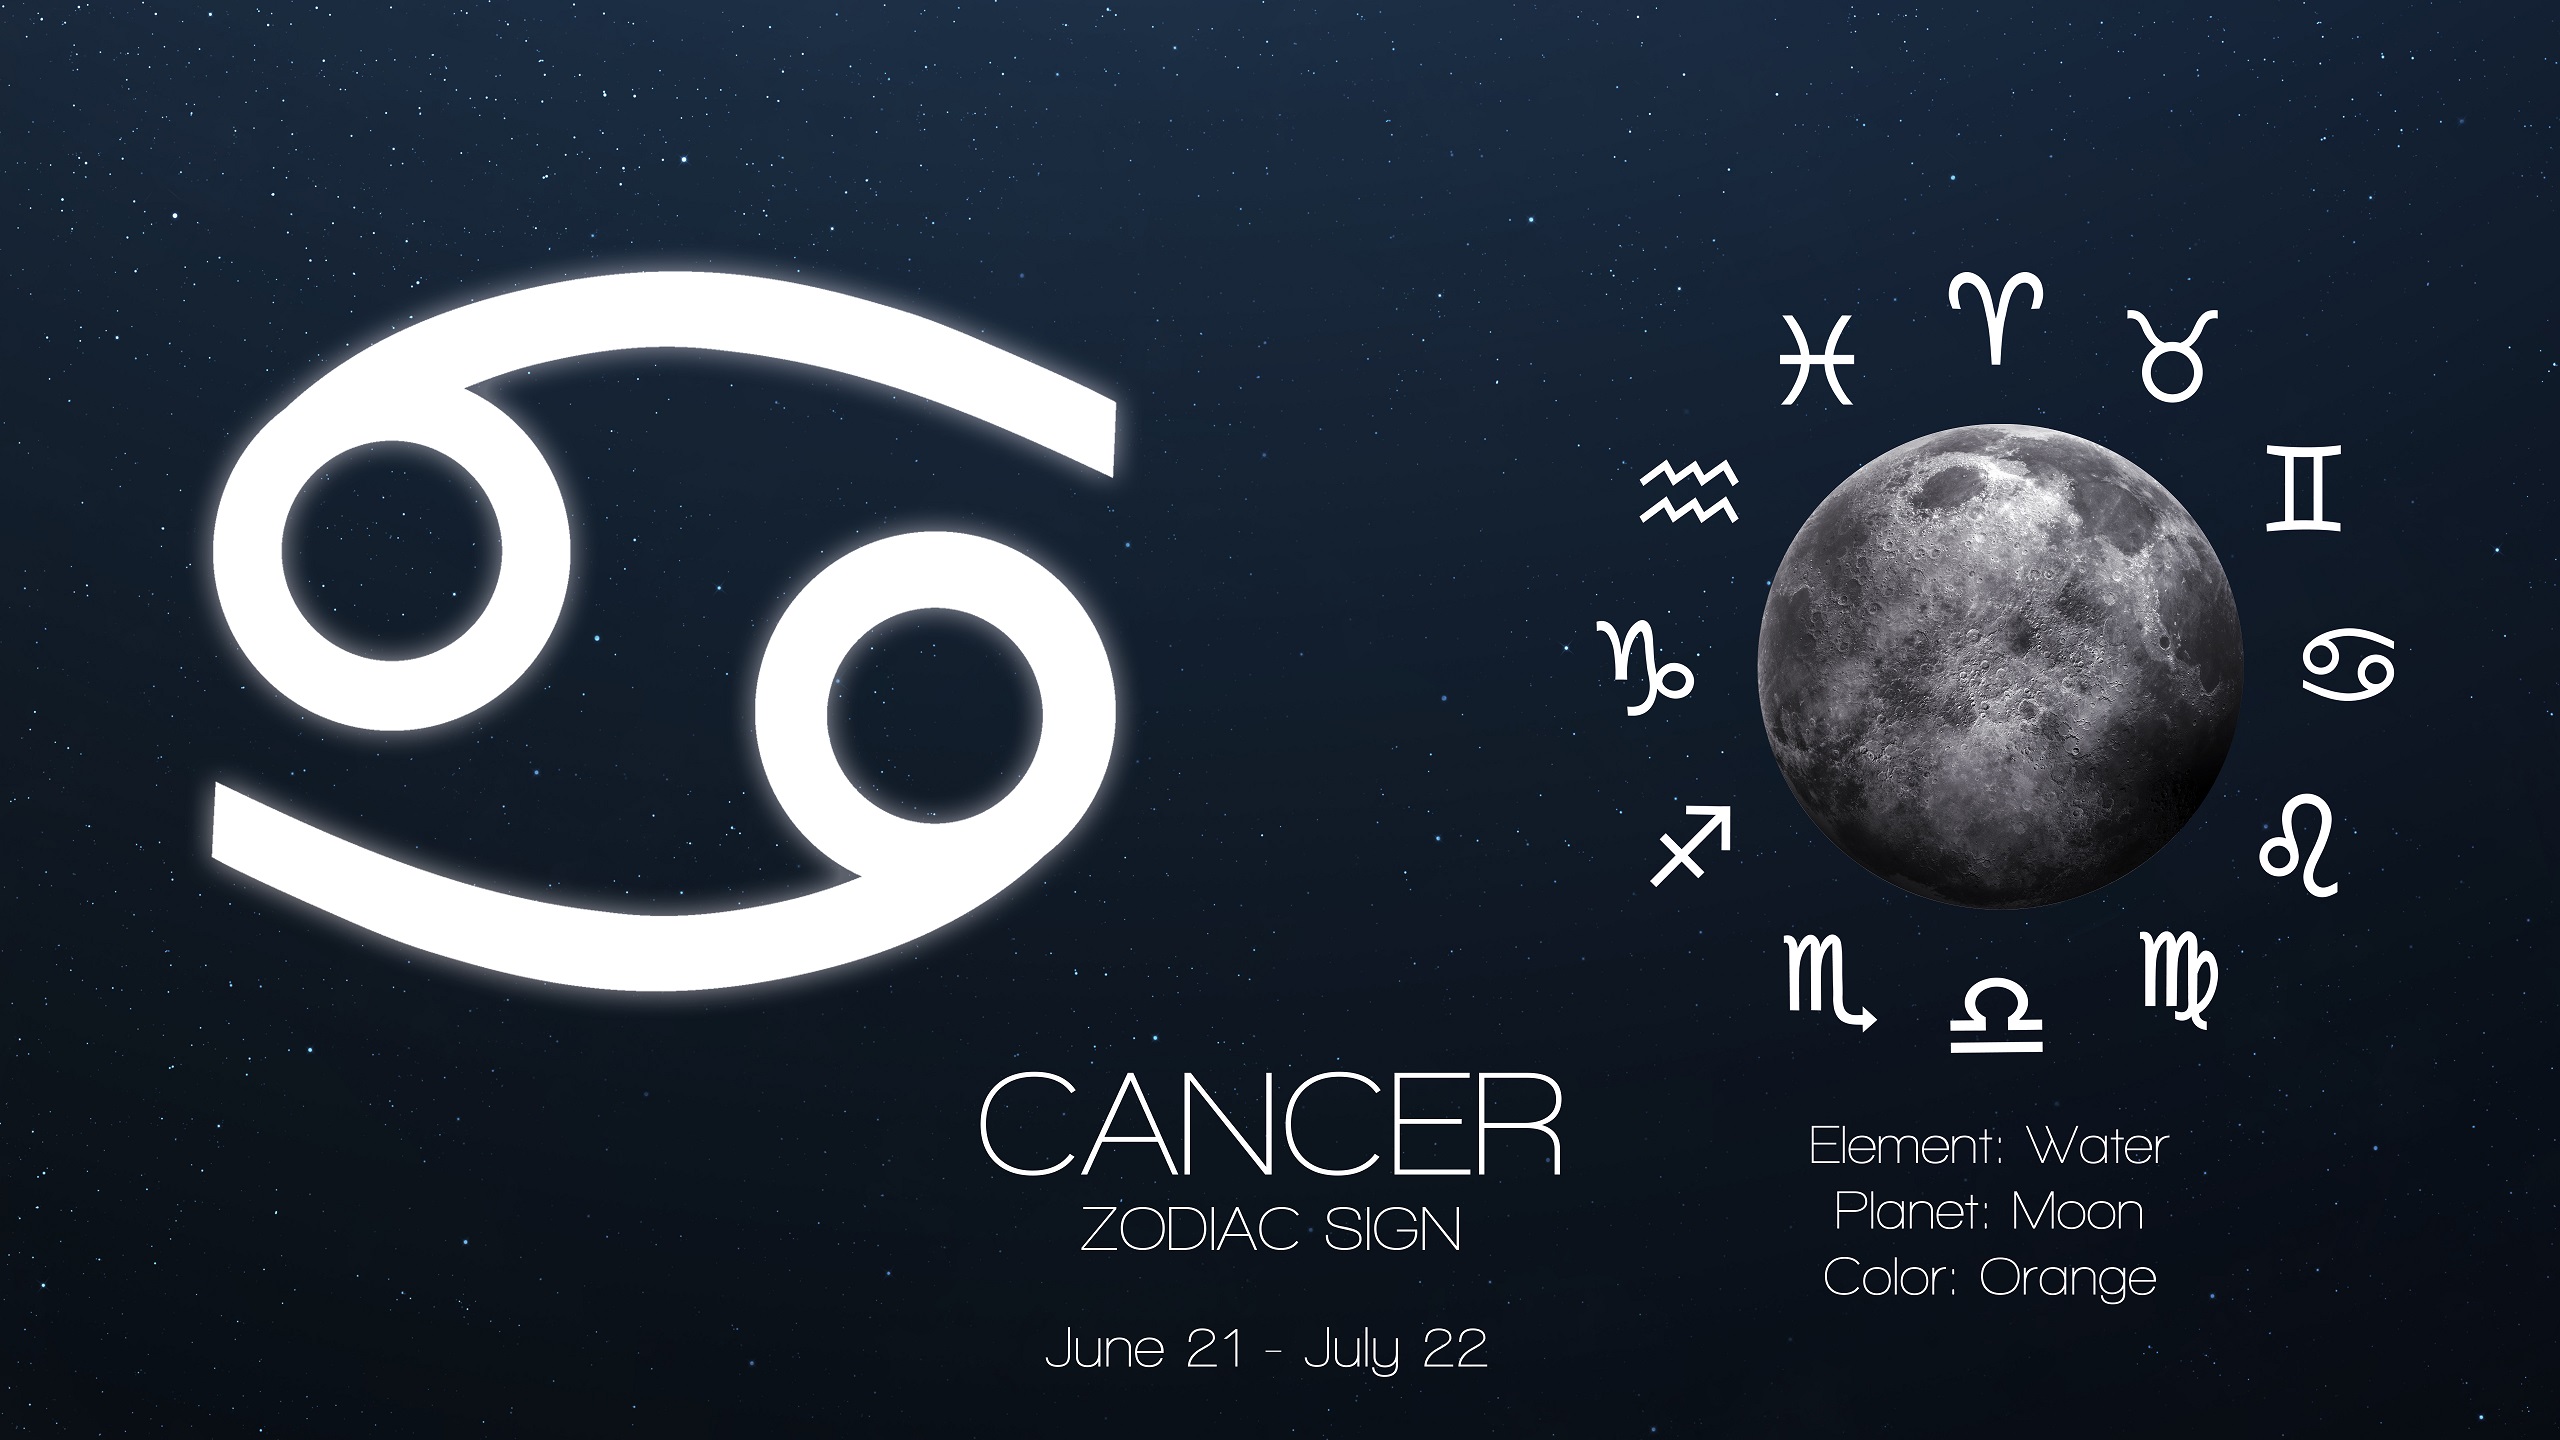 Cancer zodiac sign facts and stats